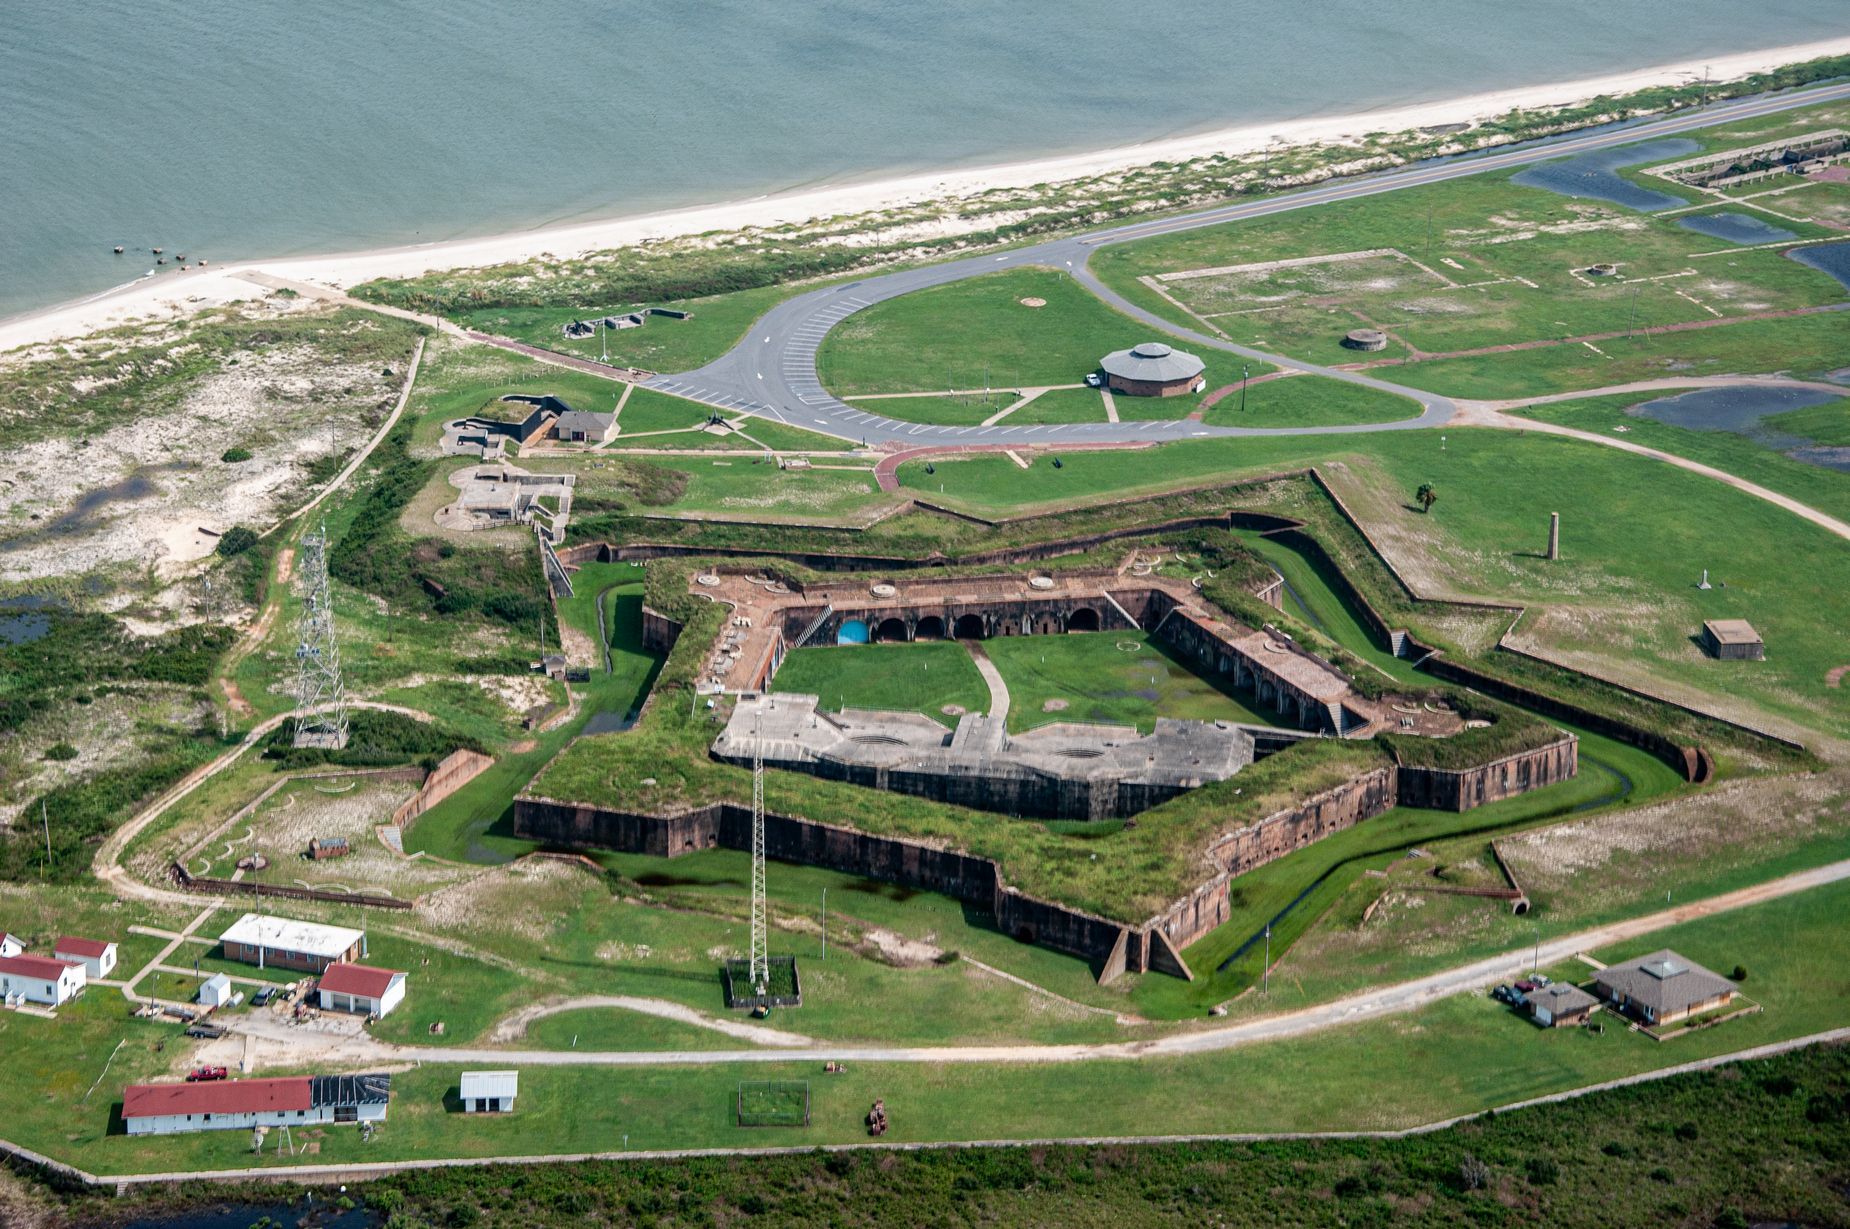 Aerial view of Fort Morgan Alabama at the mouth of Mobile Bay